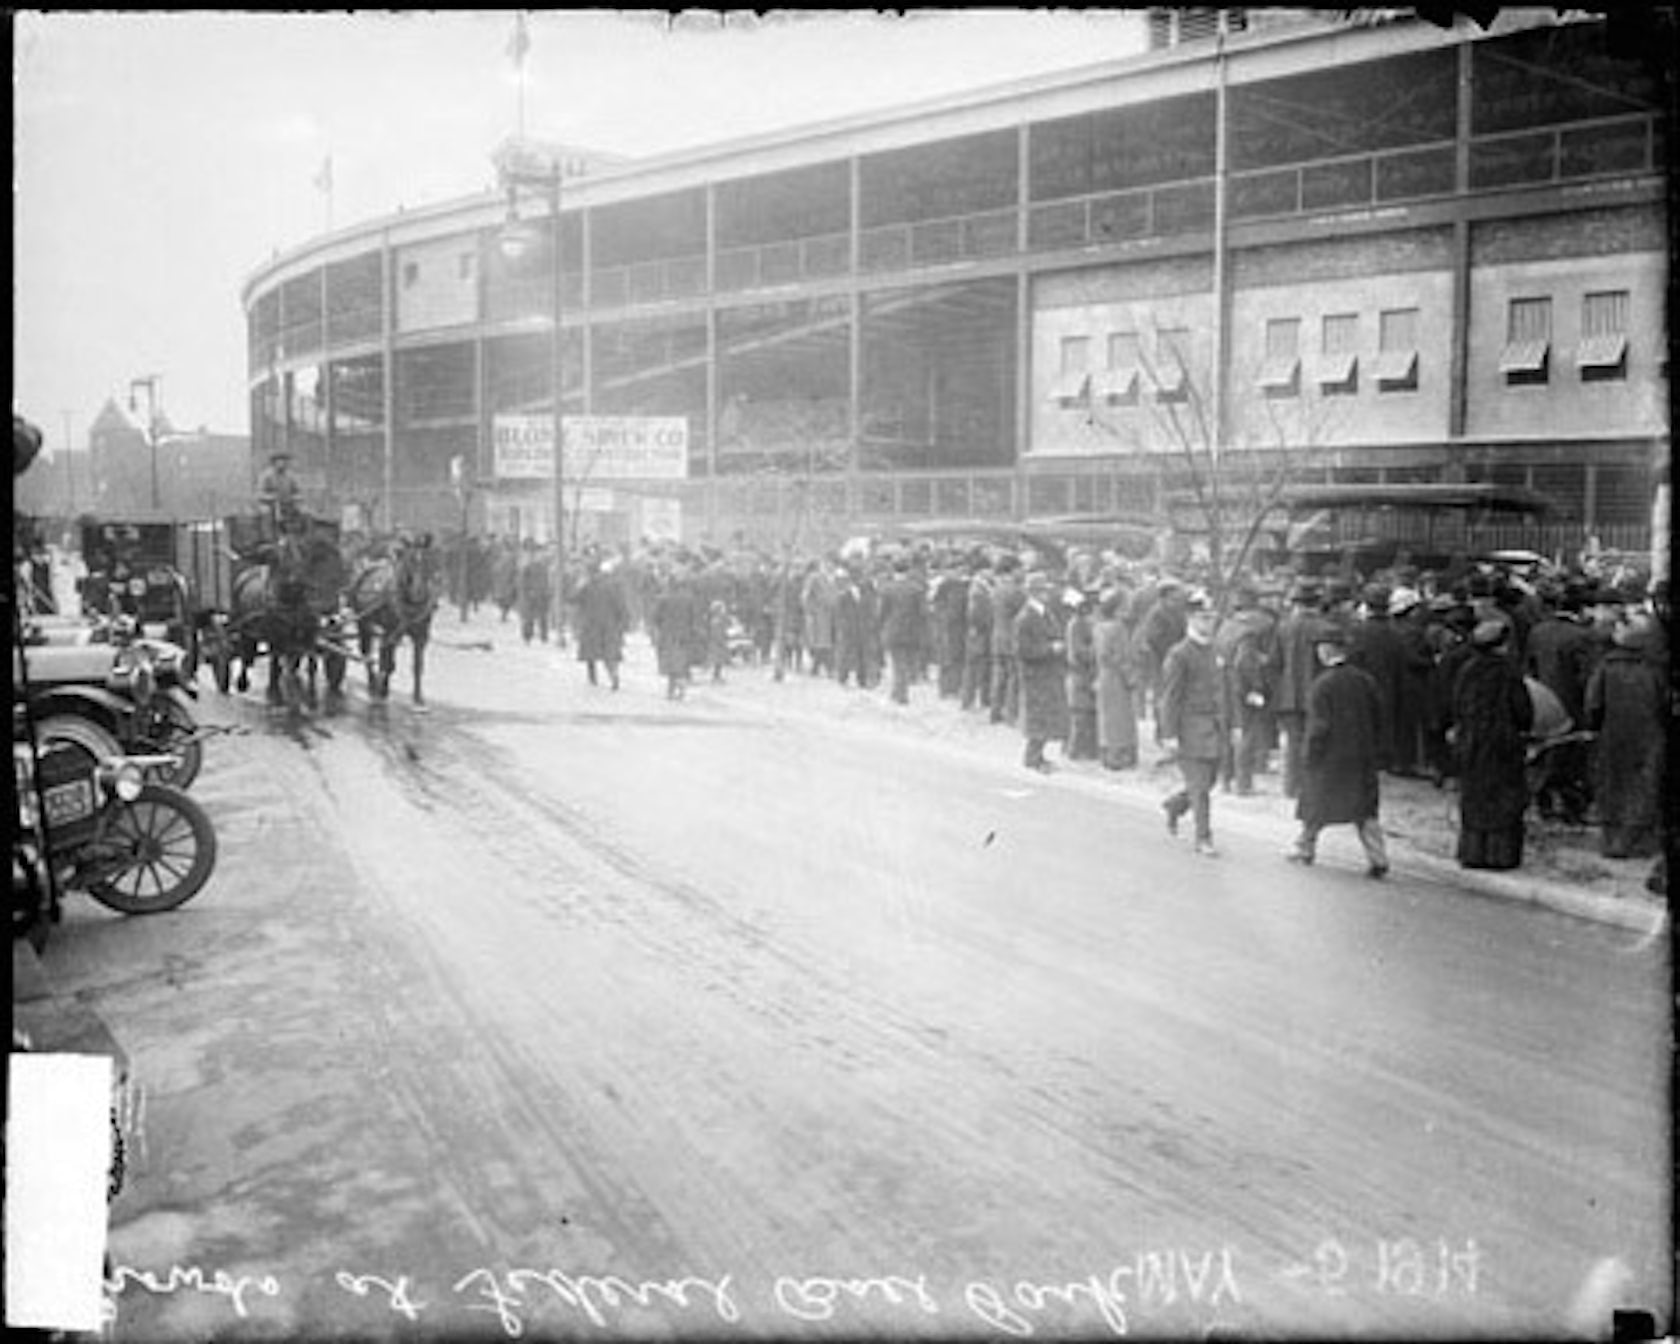 A Look At Wrigley Field 100 Years Ago and Today - Curbed Chicago